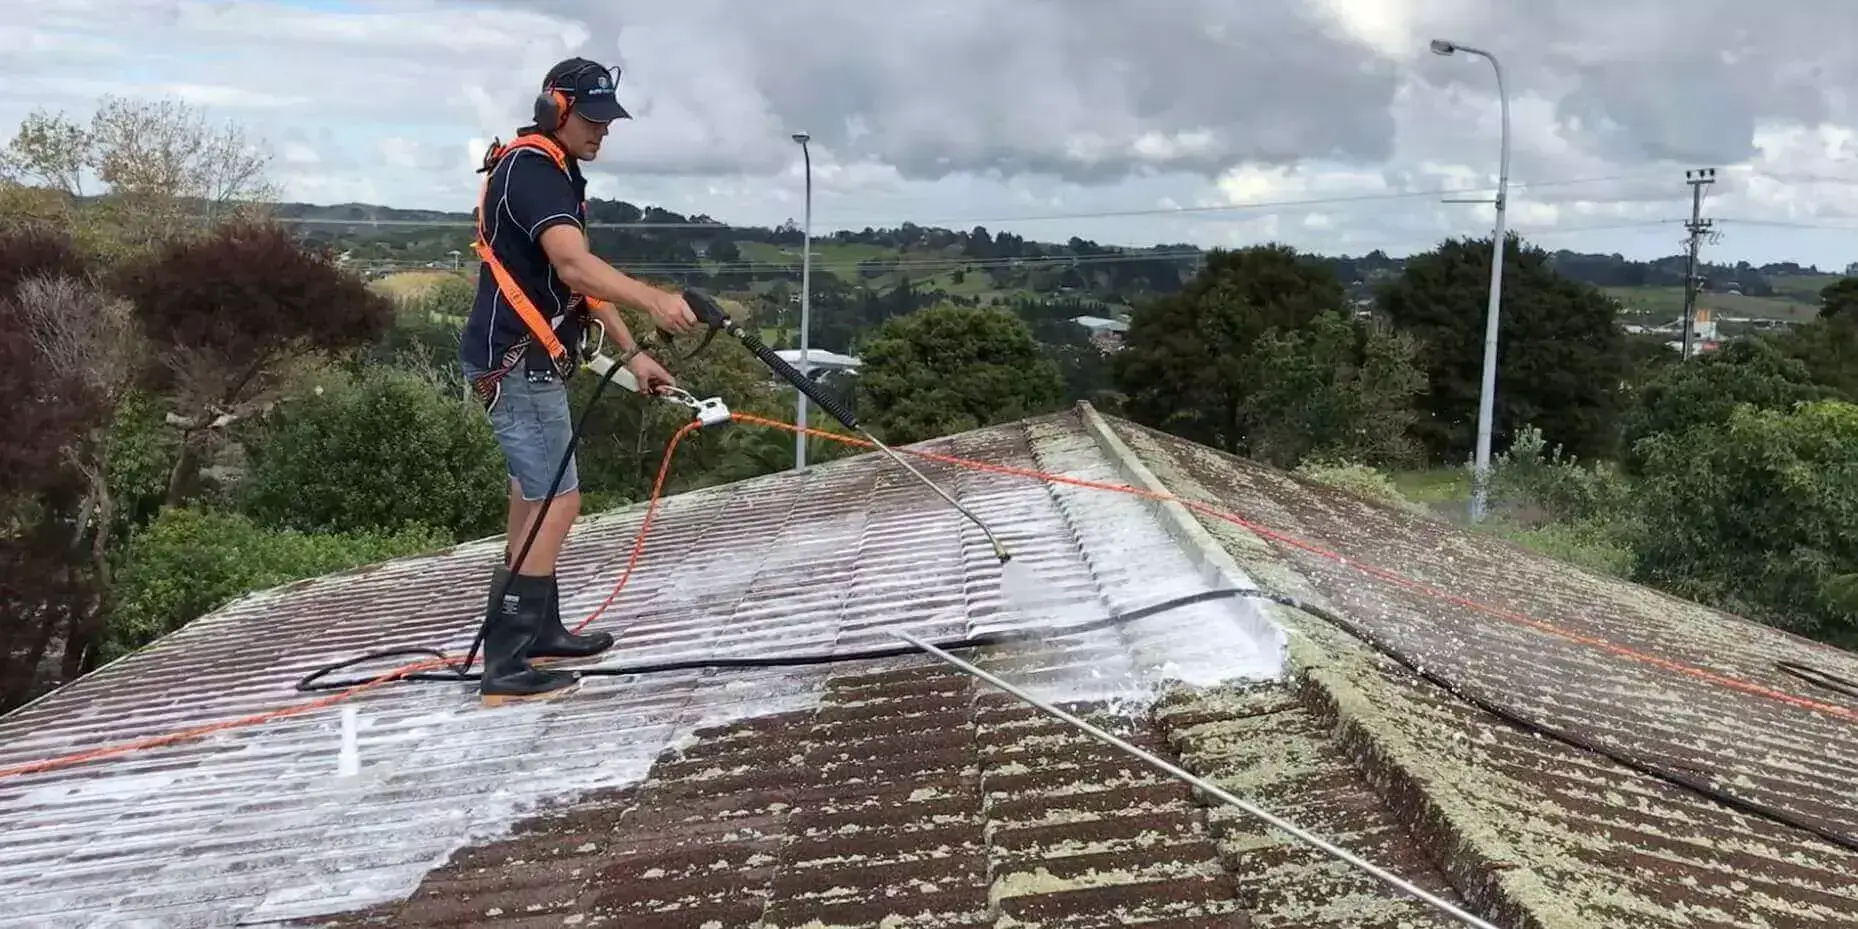 A Man Cleaning Roof Using High Water Pressure Image